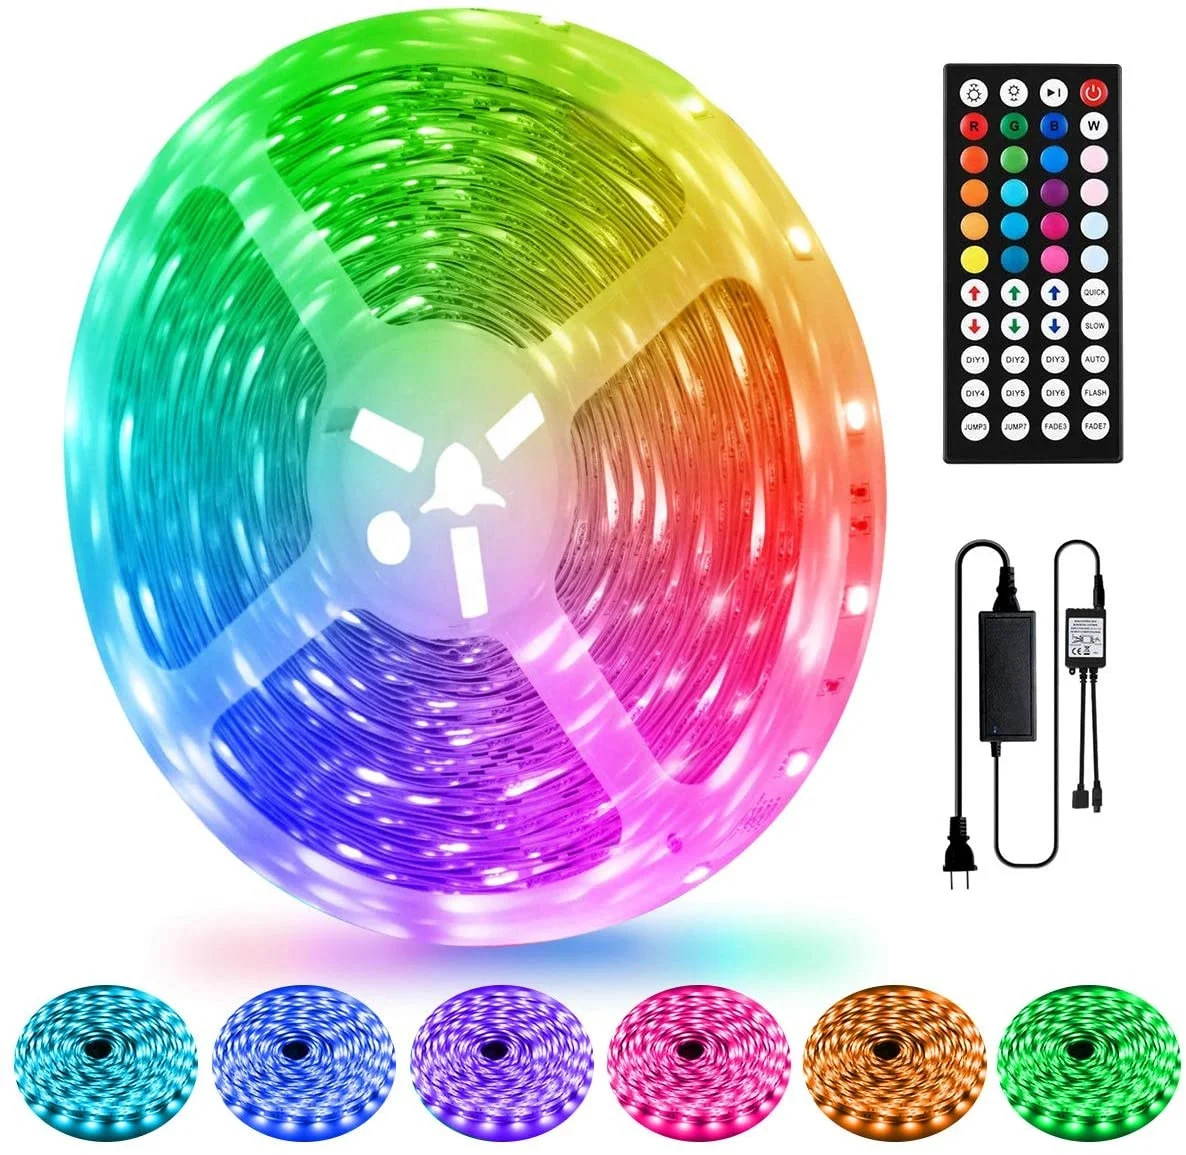 Color Changing LED Strips Light 50 Ft with 44Key IR Remote and DC24V Power Supply, Flexible 5050 RGB LED Tape Lights for Room